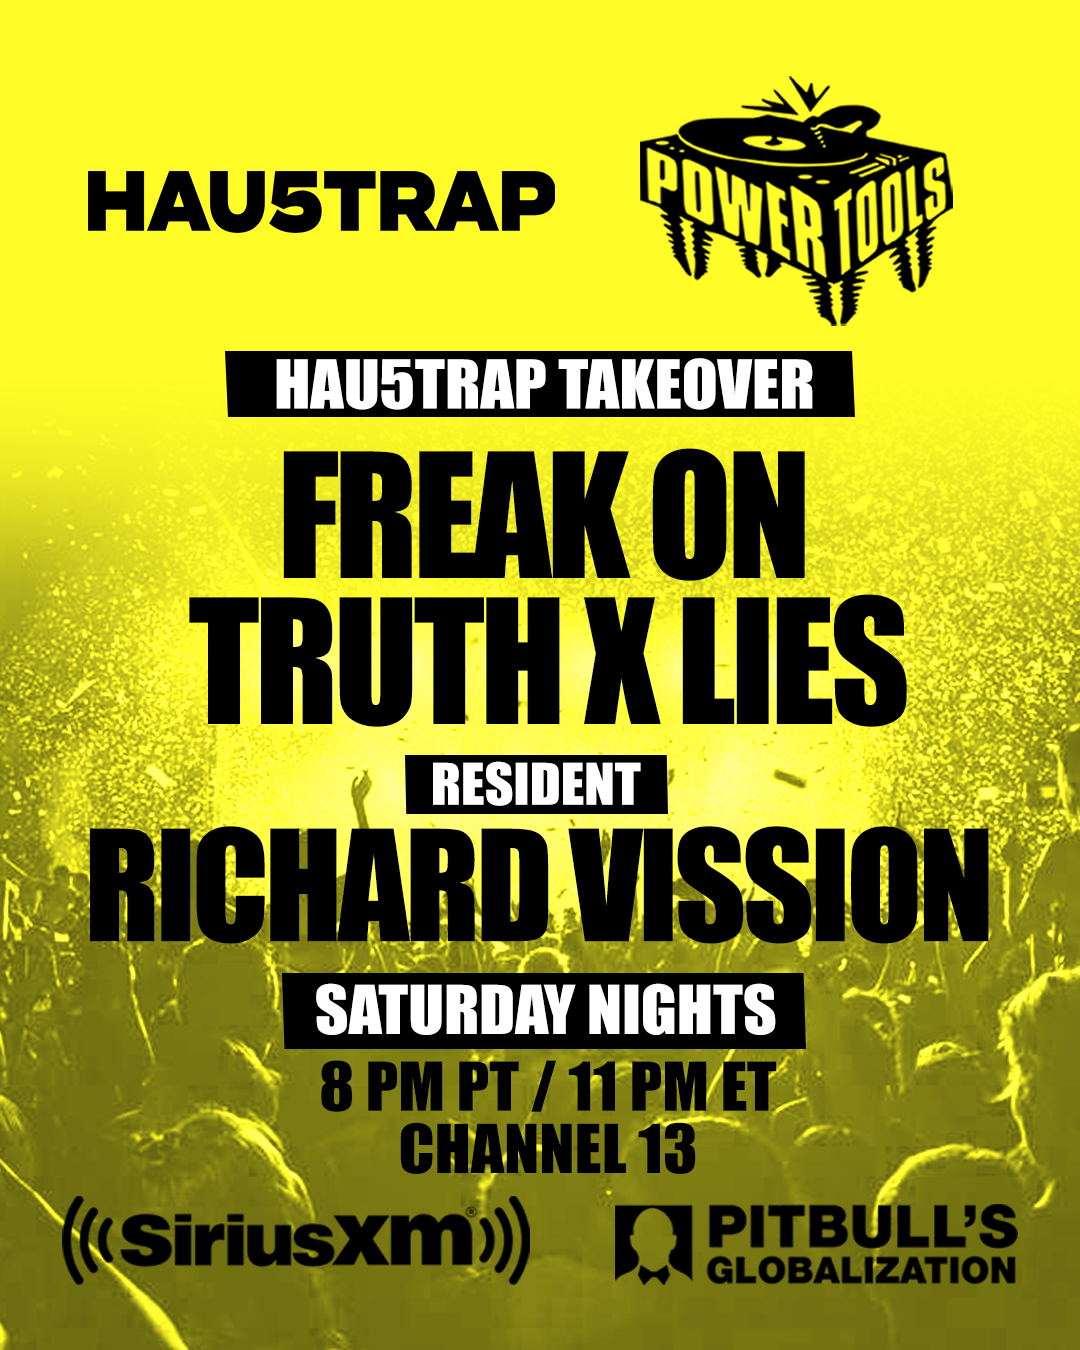 Episode 73: Powertools: Hau5trap Takeover ft. Freak On and Truth x Lies